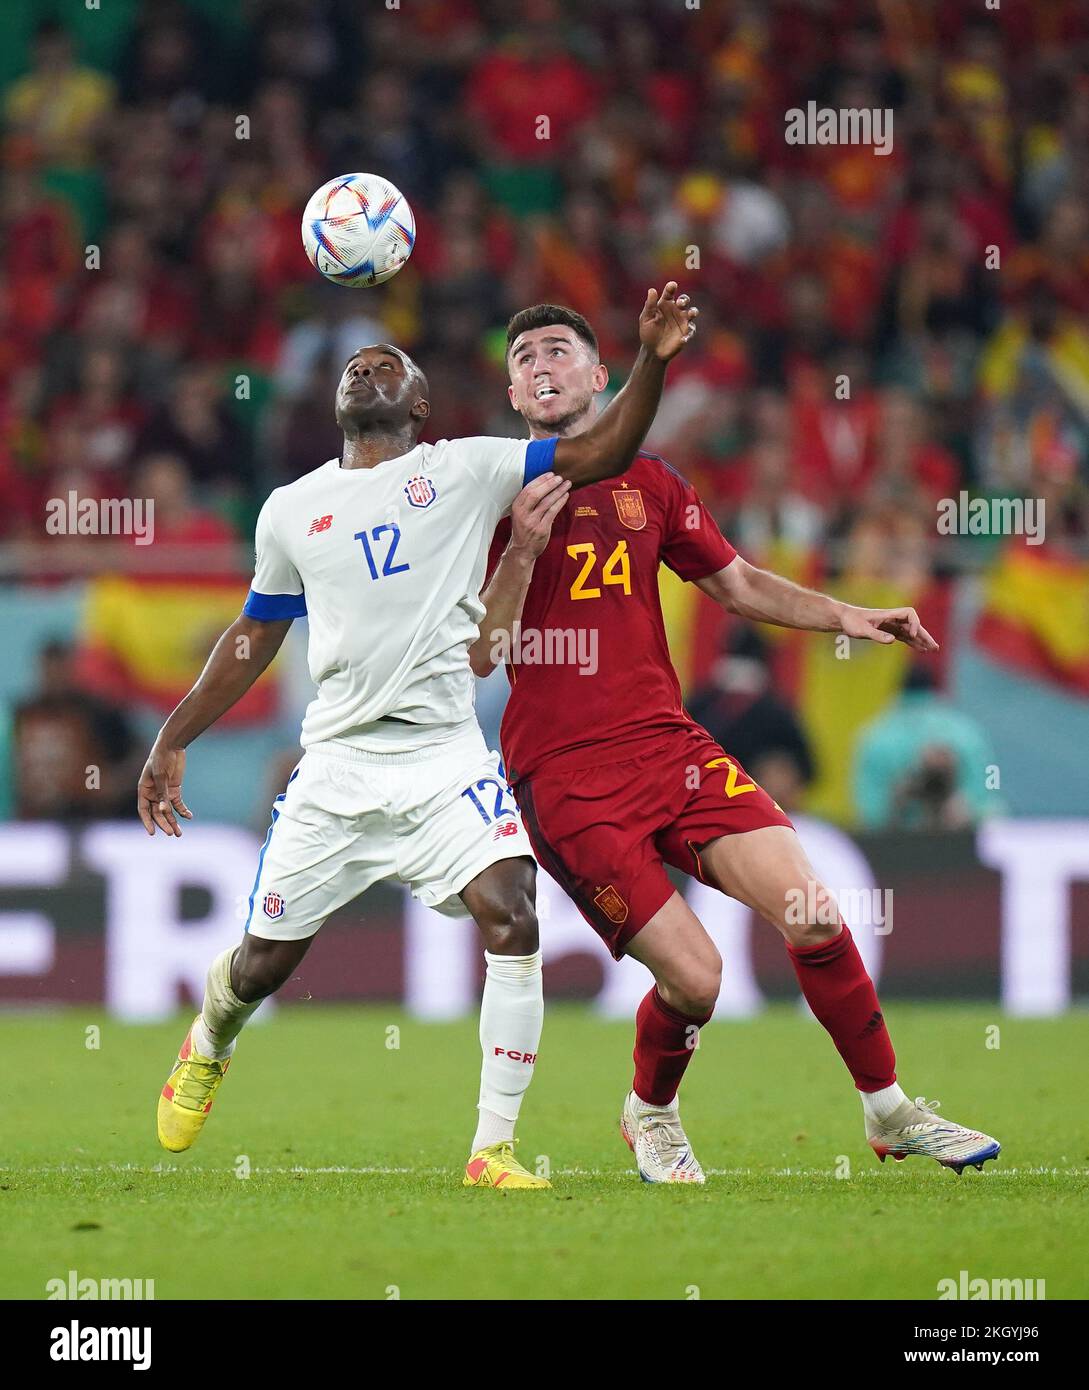 Costa Rica's Joel Campbell (left) and Spain's Aymeric Laporte battle for the ball during the FIFA World Cup Group E match at the Al Thumama Stadium, Doha. Picture date: Wednesday November 23, 2022. Stock Photo